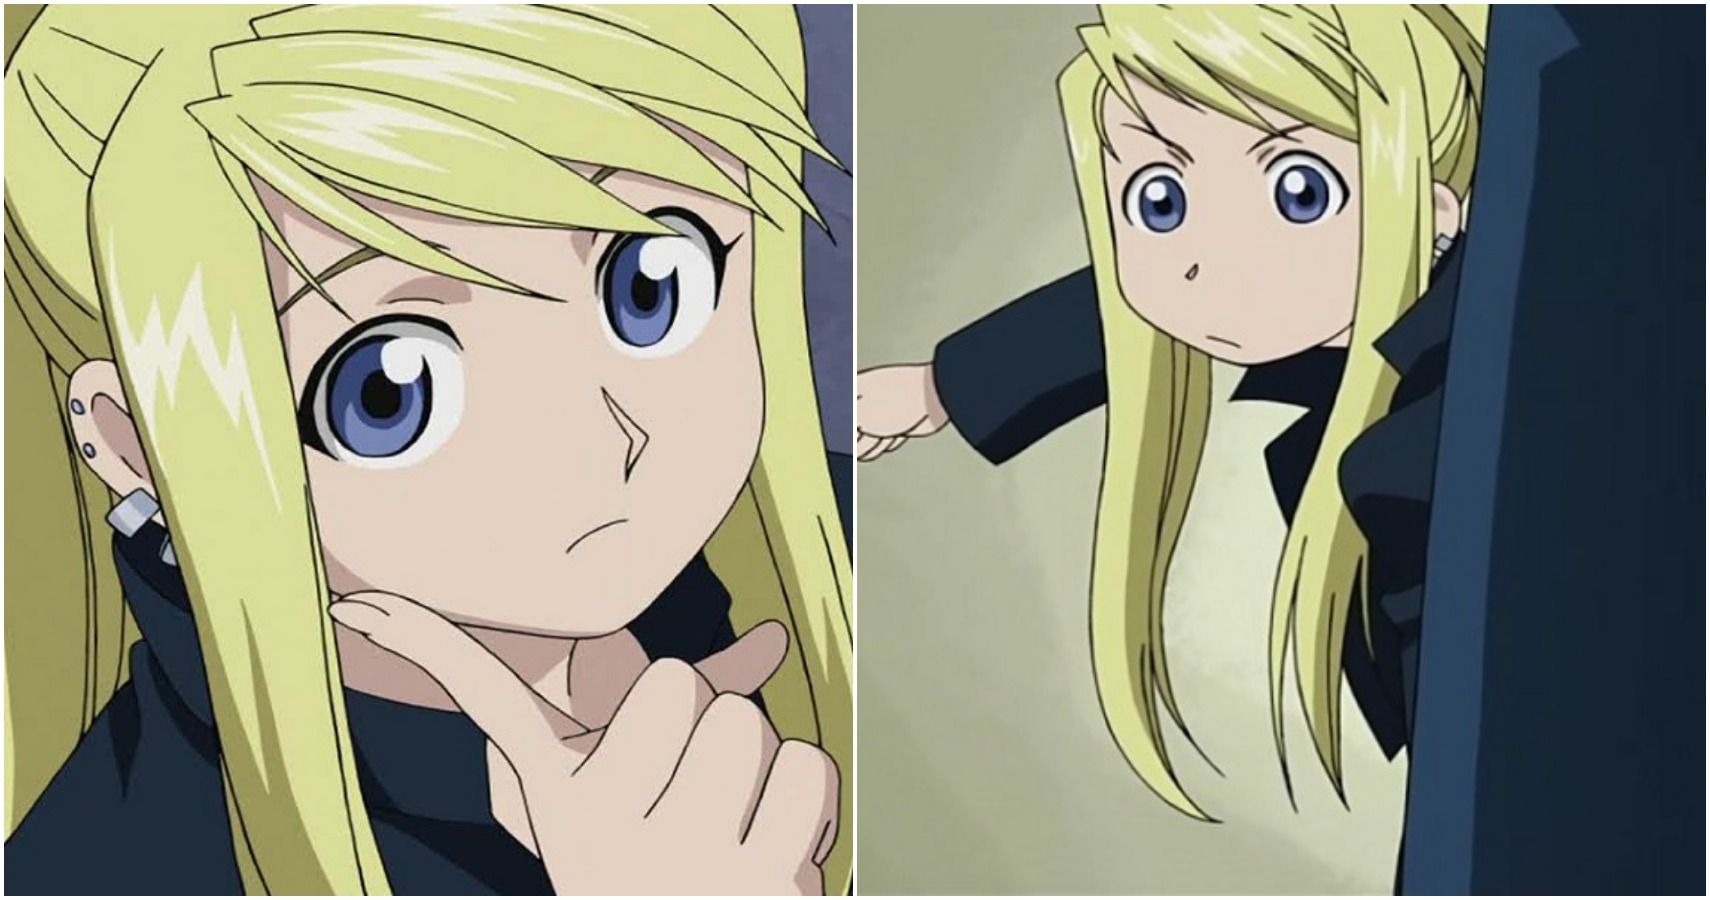 Winry Rockbell by KrazyKamikaze44 on DeviantArt | Anime character drawing,  Full metal alchemist winry, Anime characters